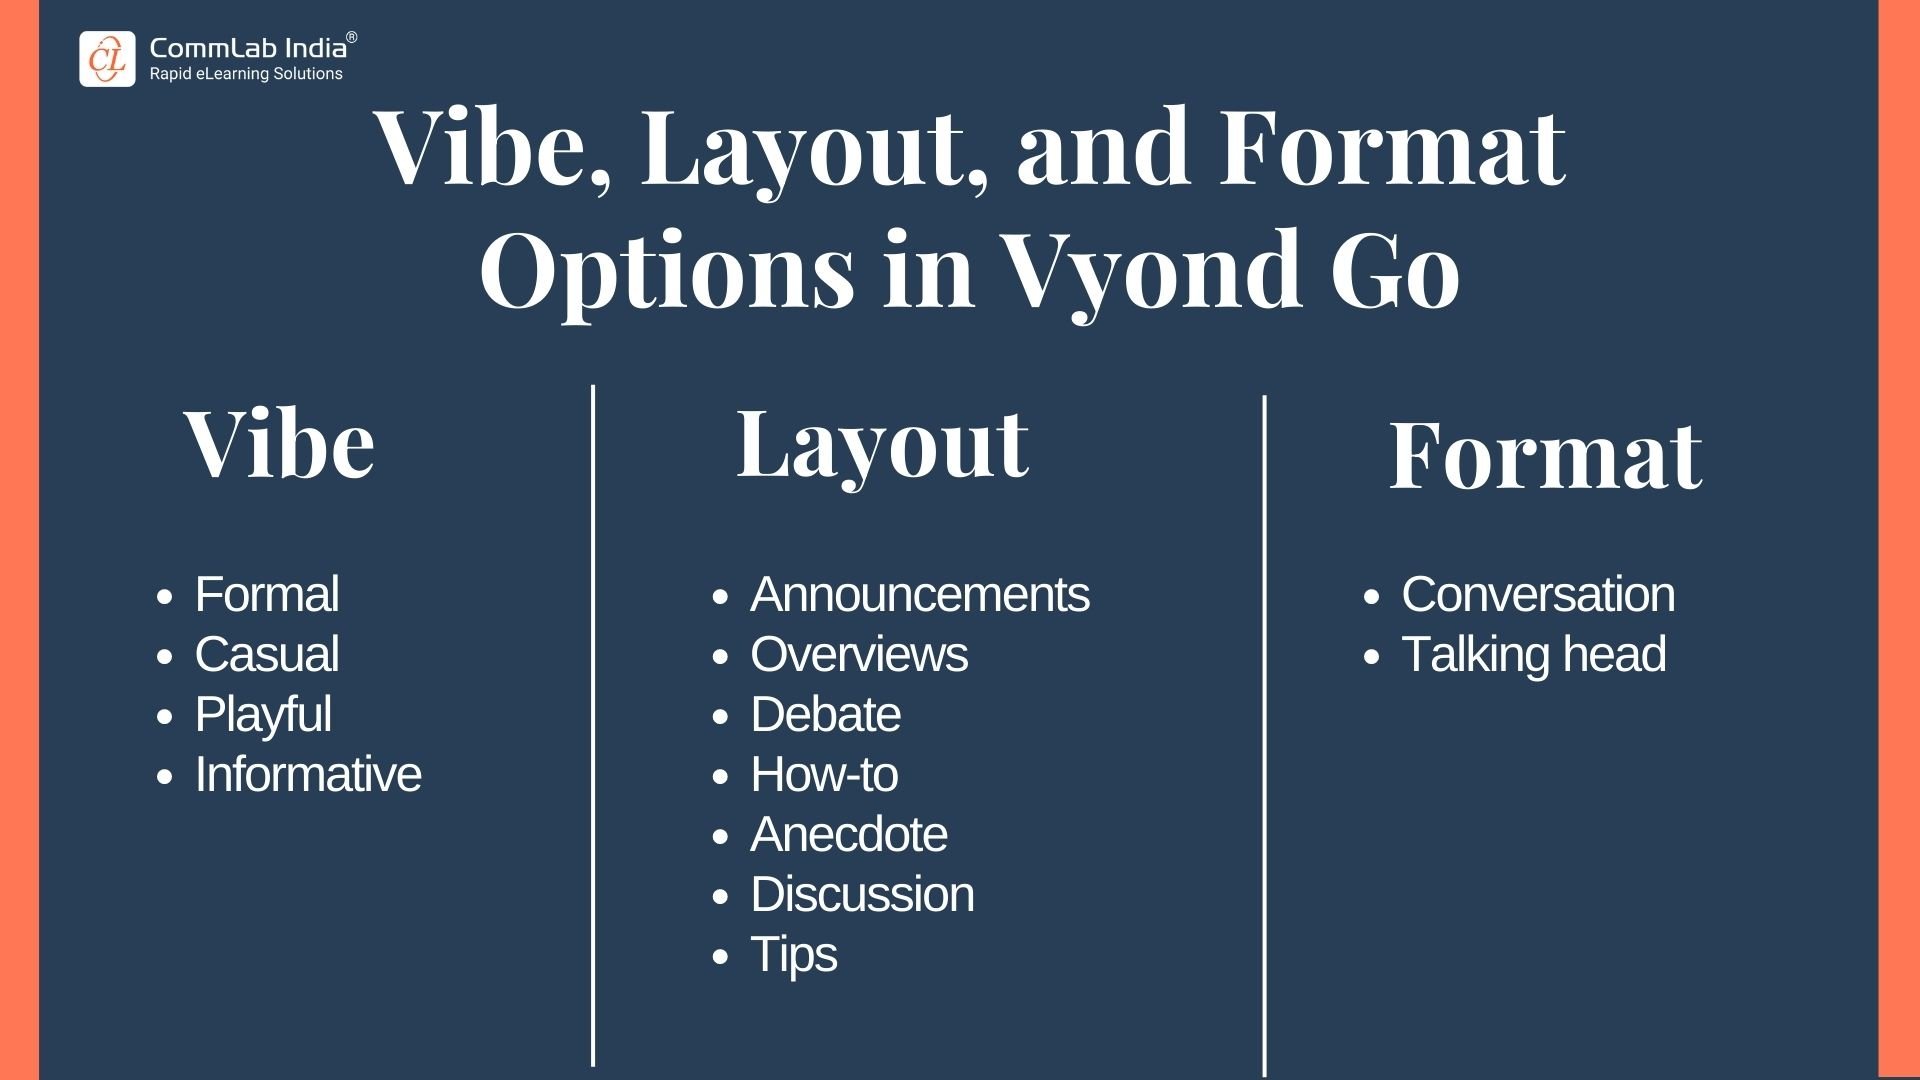 different options available for formats, layouts, and vibes